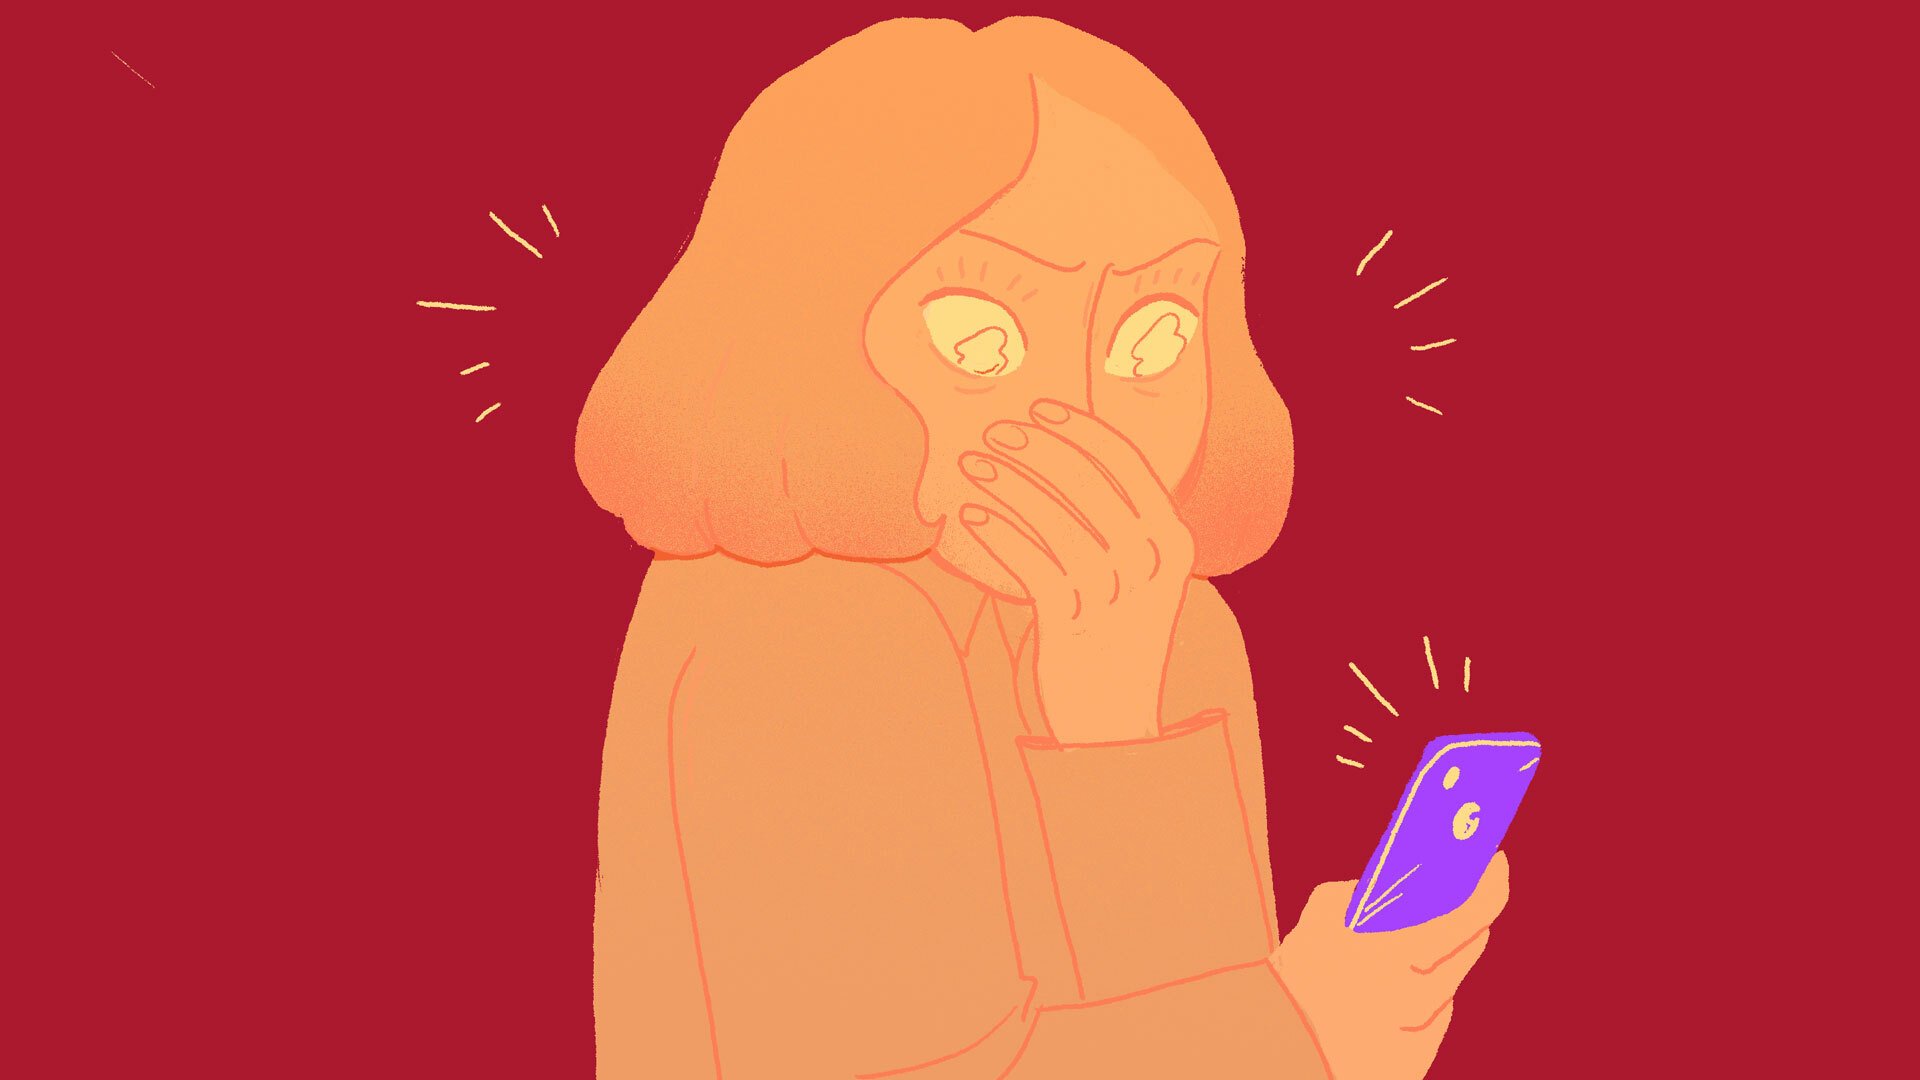 An illustration of a woman looking at a smartphone.